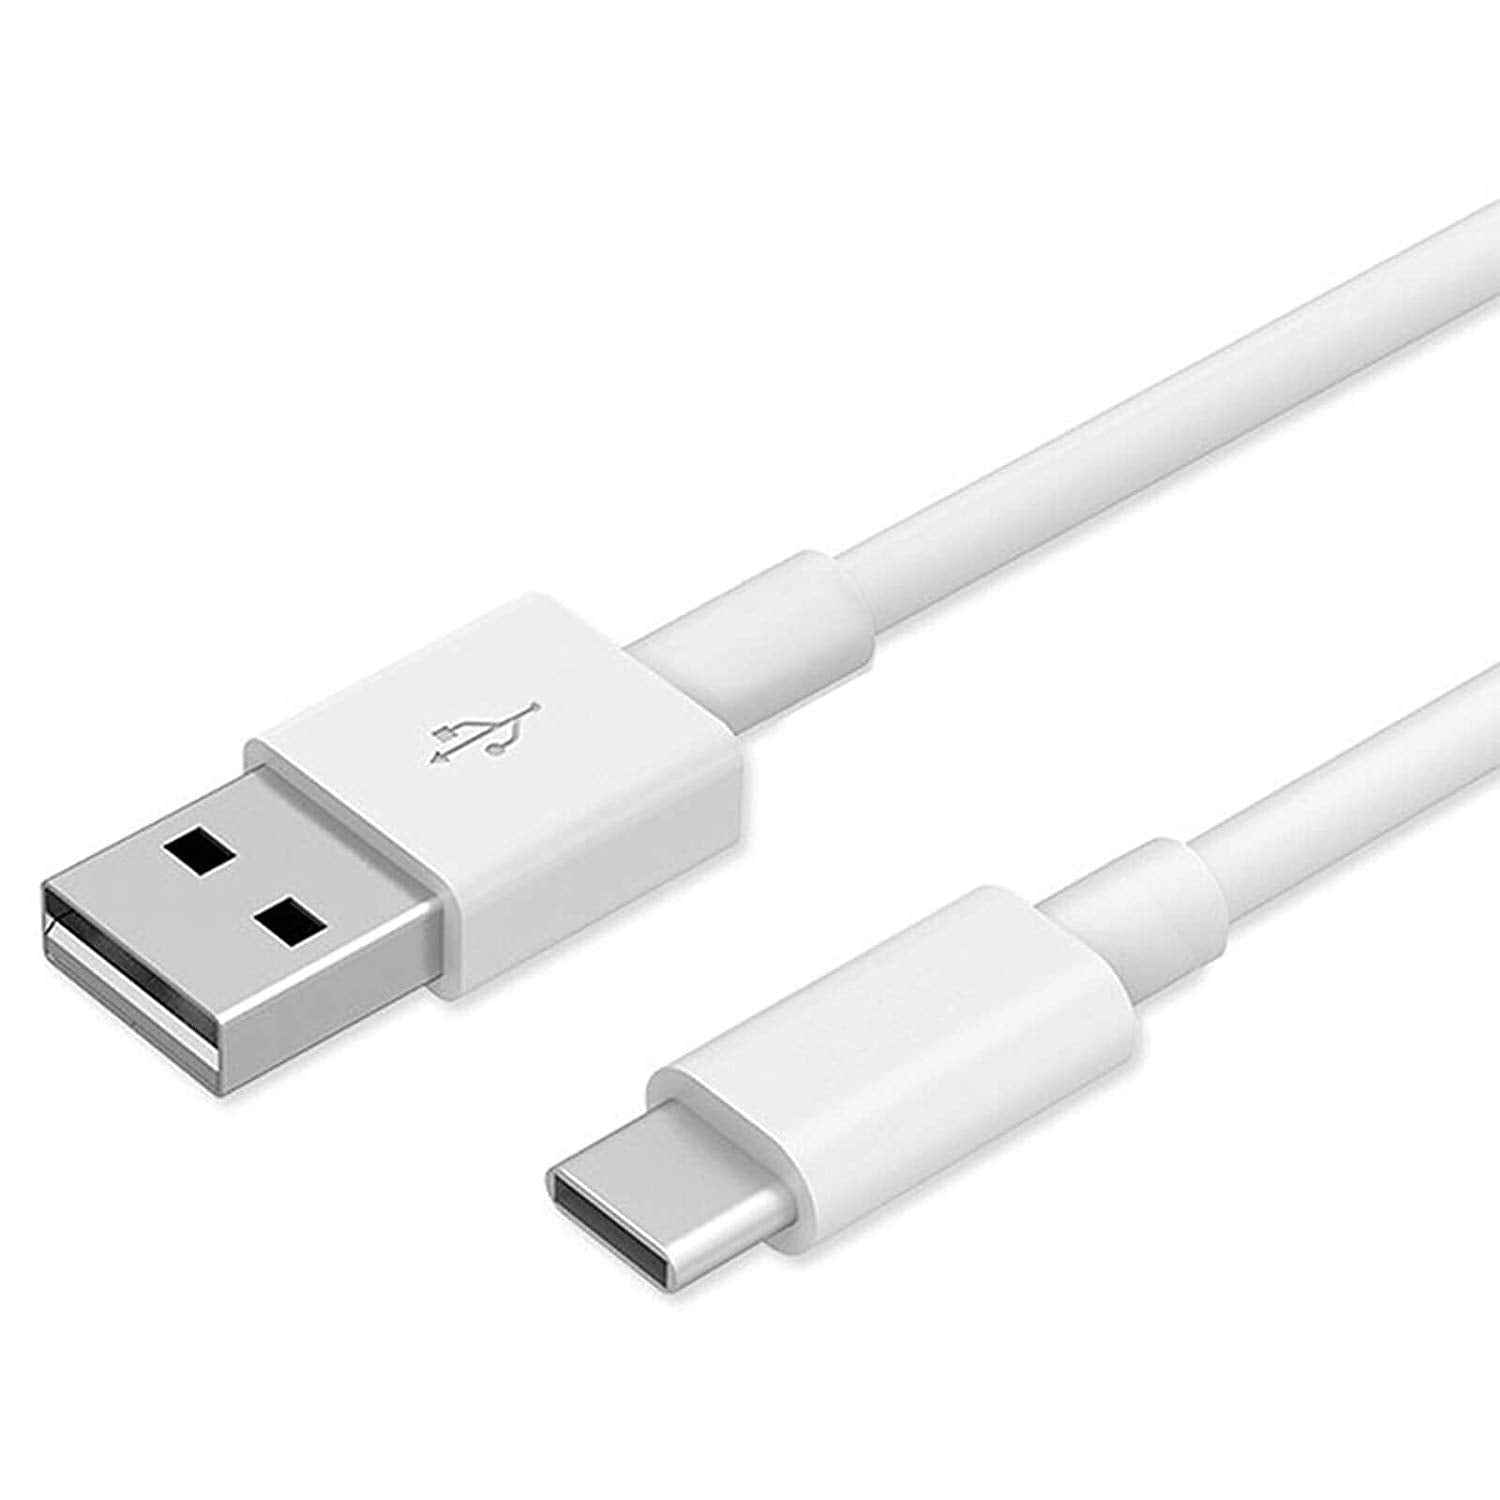 Samsung Galaxy A21s USB to Type C Charging Cable Lead White - 3M - SmartPhoneGadgetUK